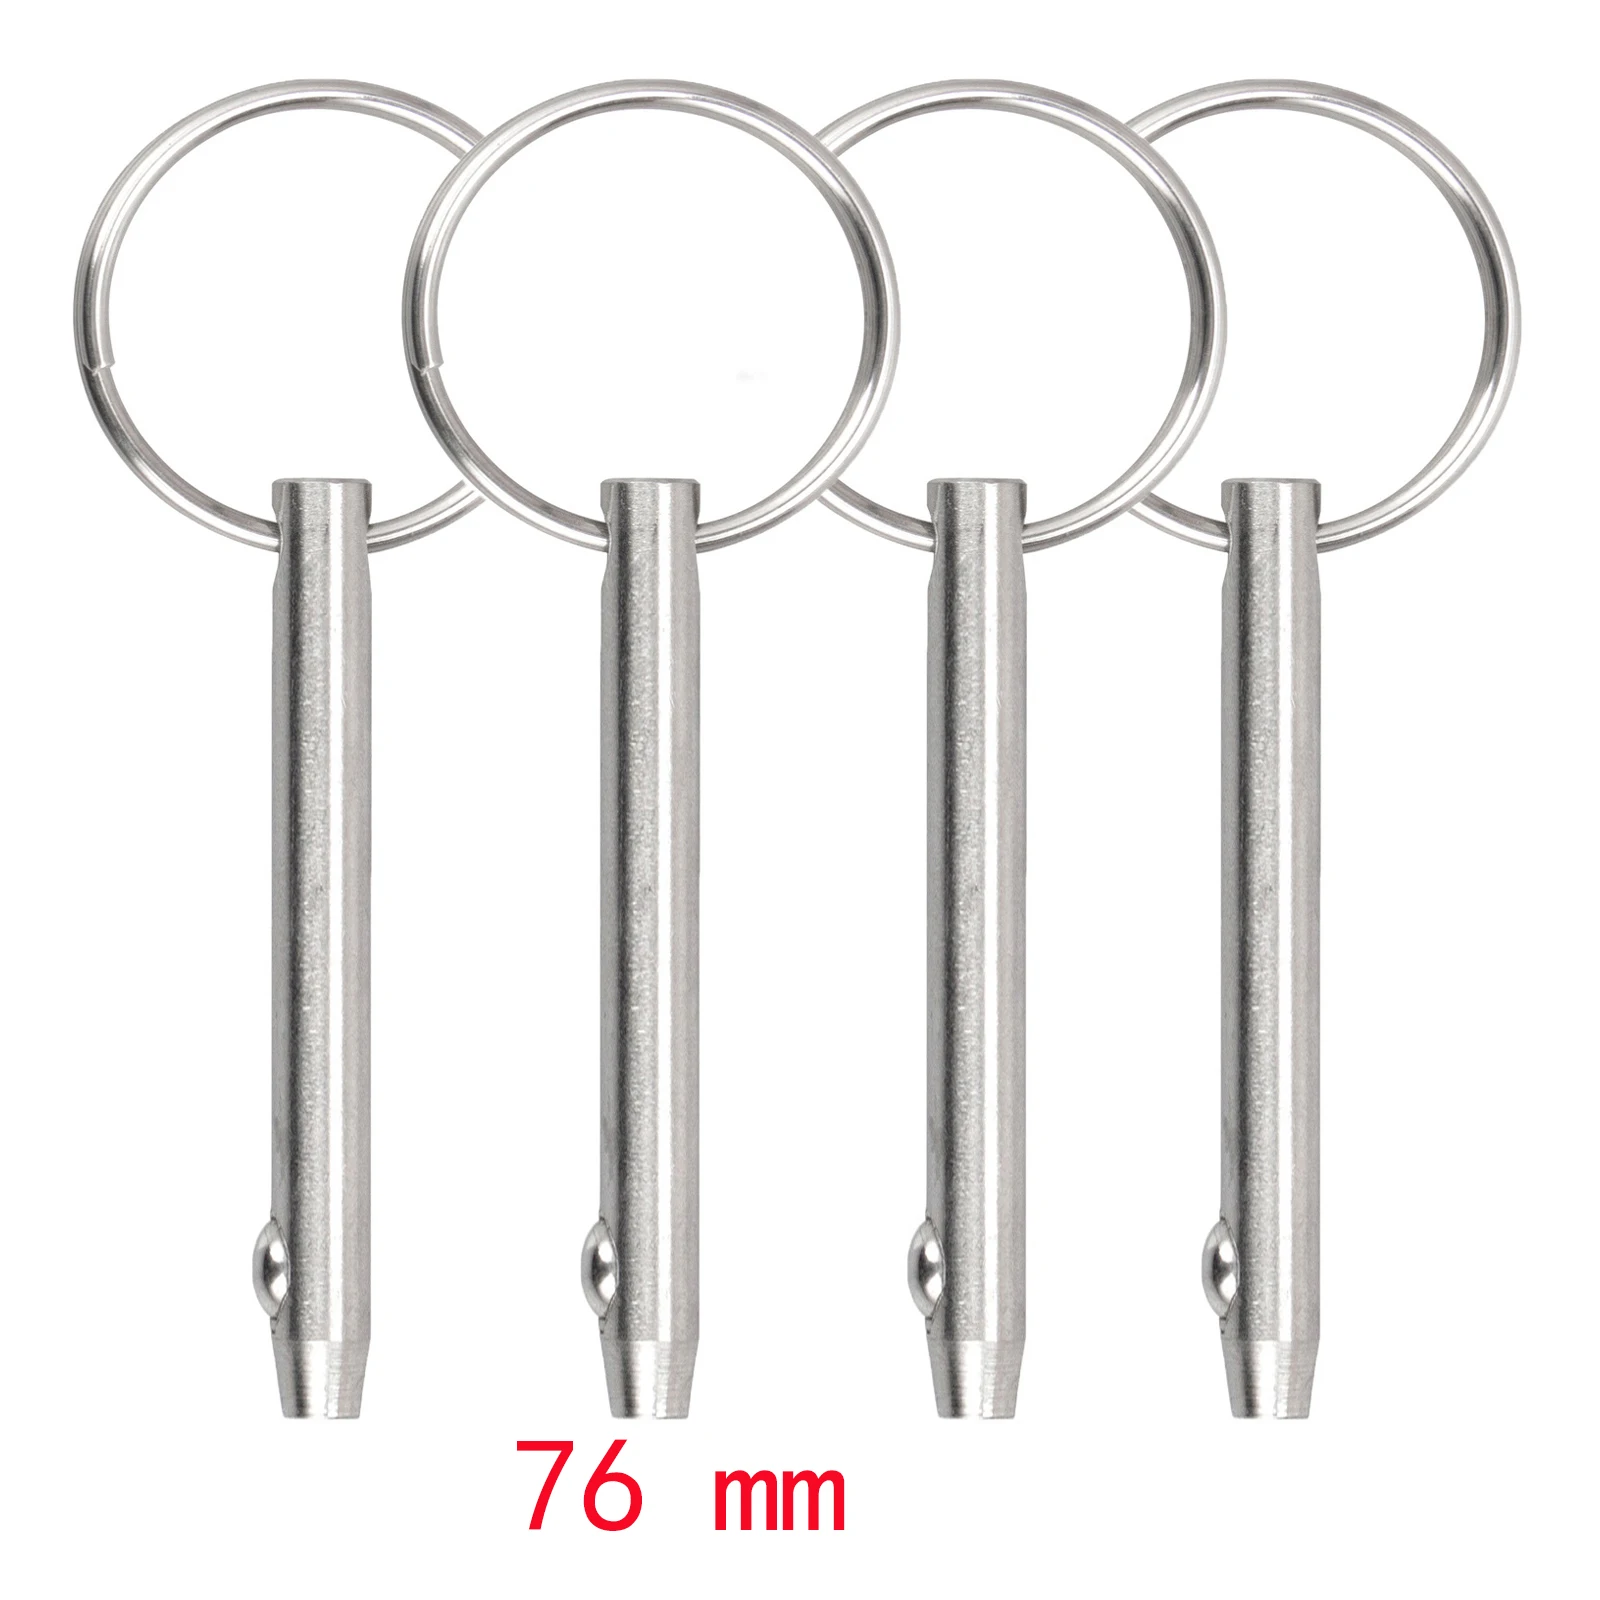 Quick Release Pins Bimini Top Pins, Total Length 3 Inch/76mm, Diameter 0.25 Inch/6.3mm,  316 Stainless Steel (Optional 4 or 10)